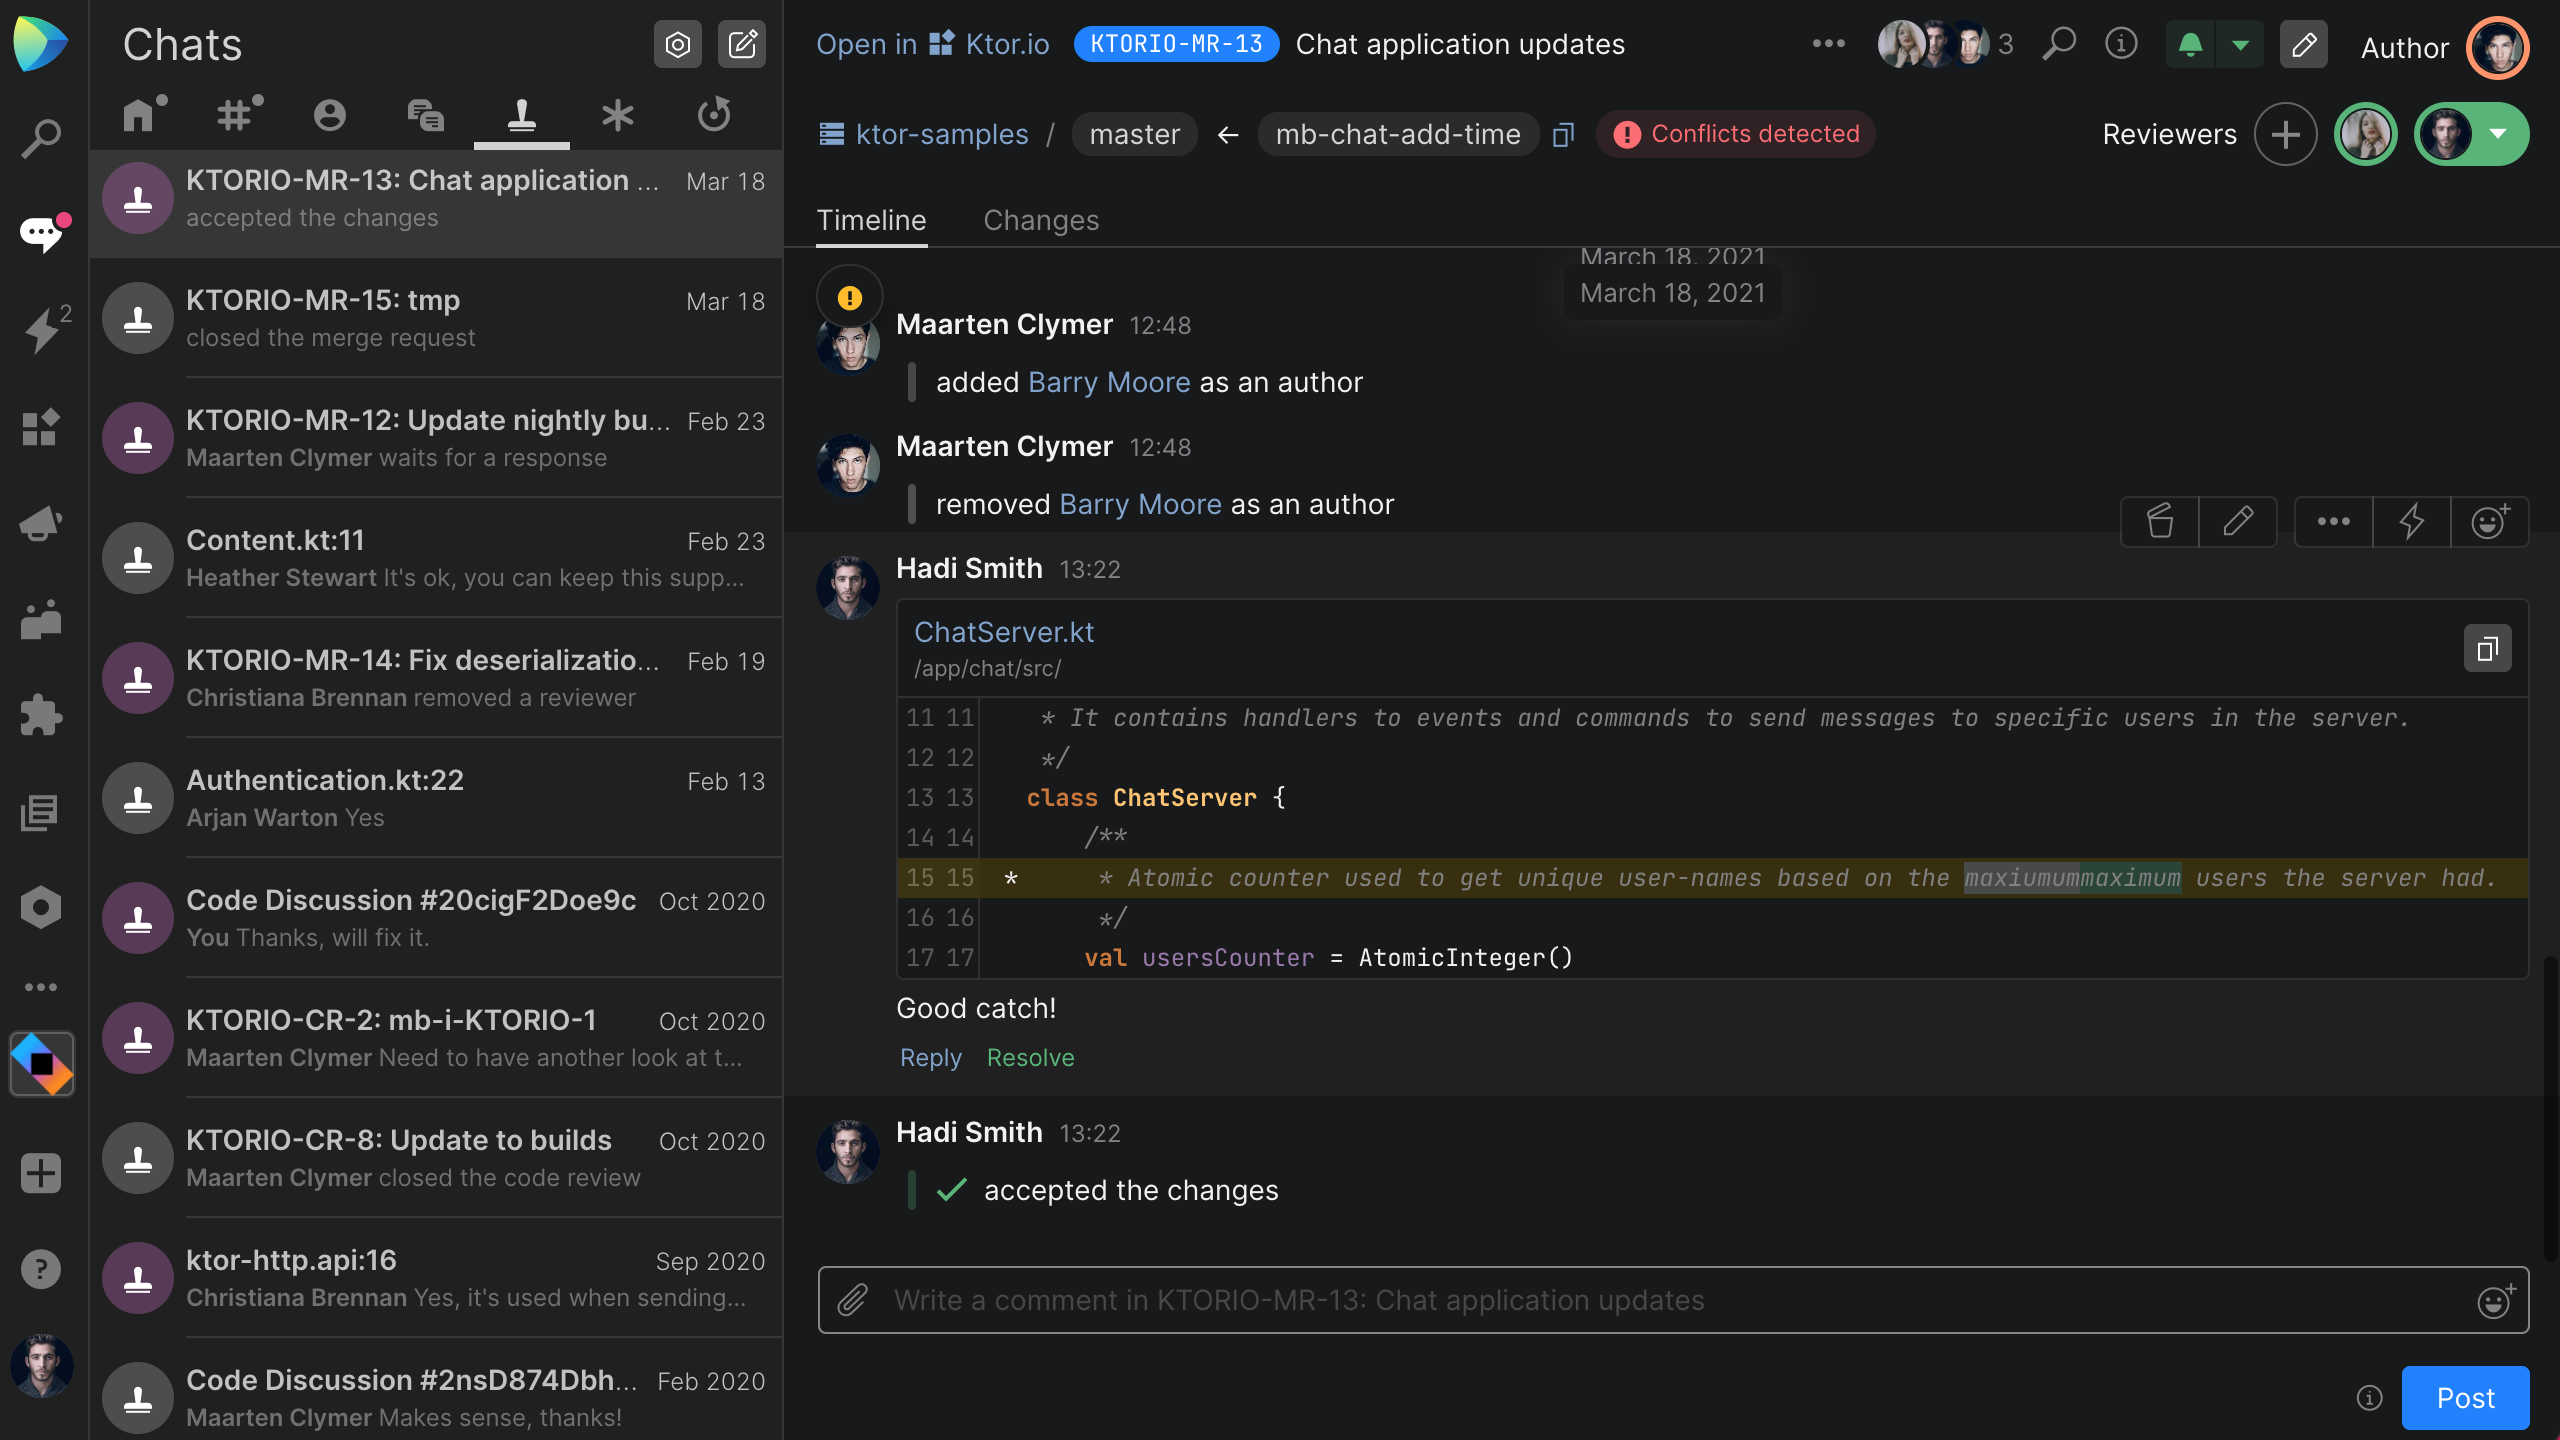 Space Code Review - Dark Theme enabled